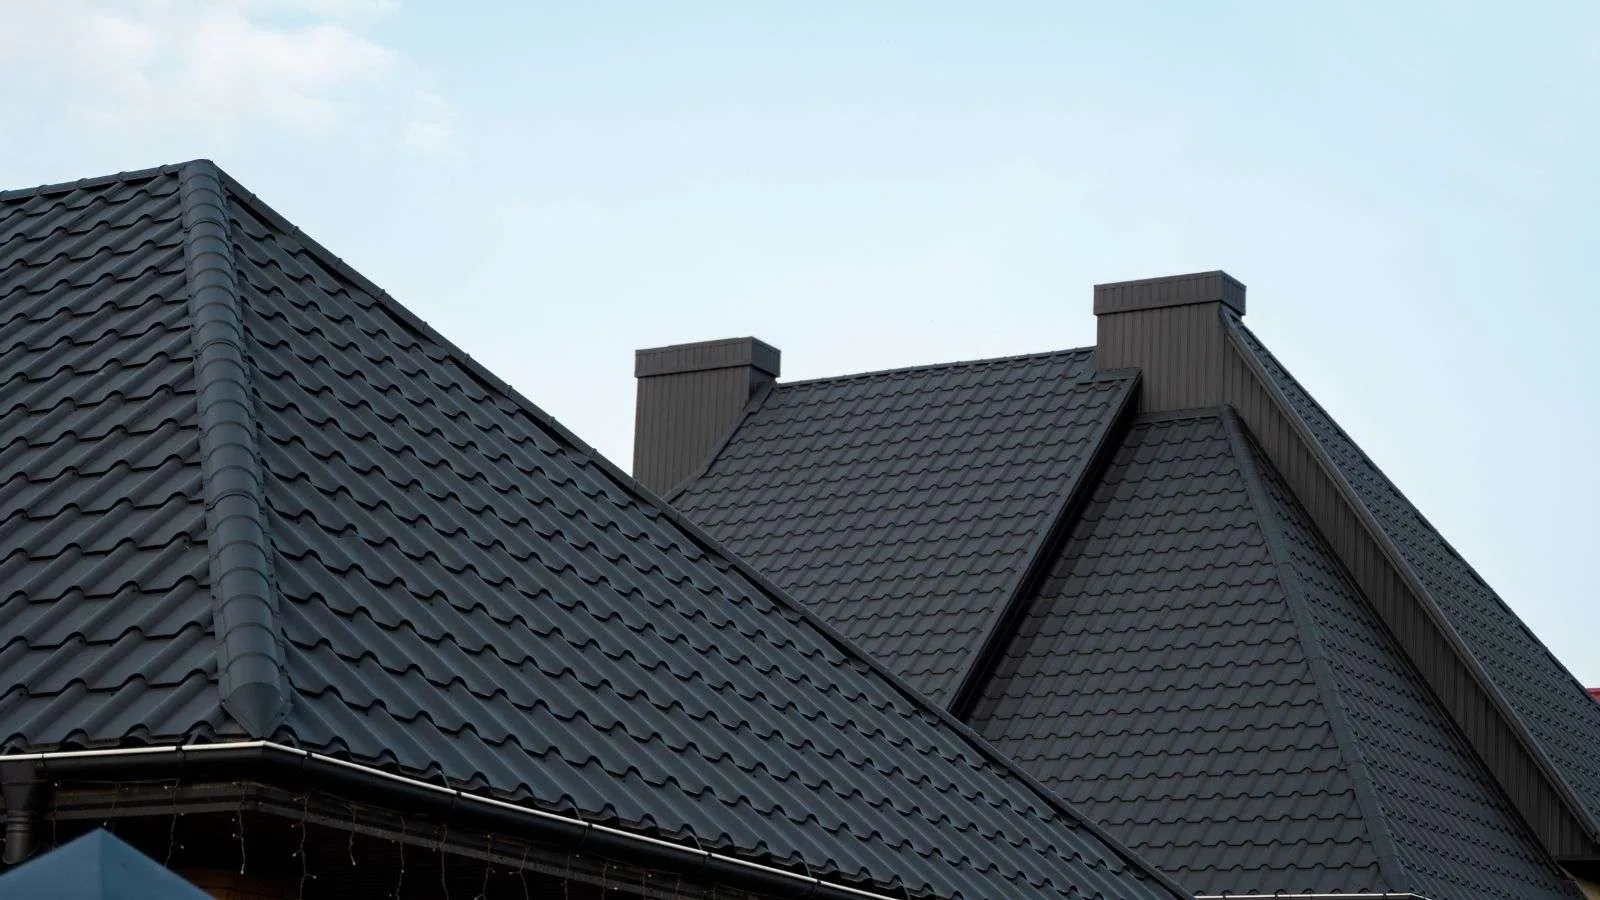 life expectancy of roofing materials - bighomeprojects.com